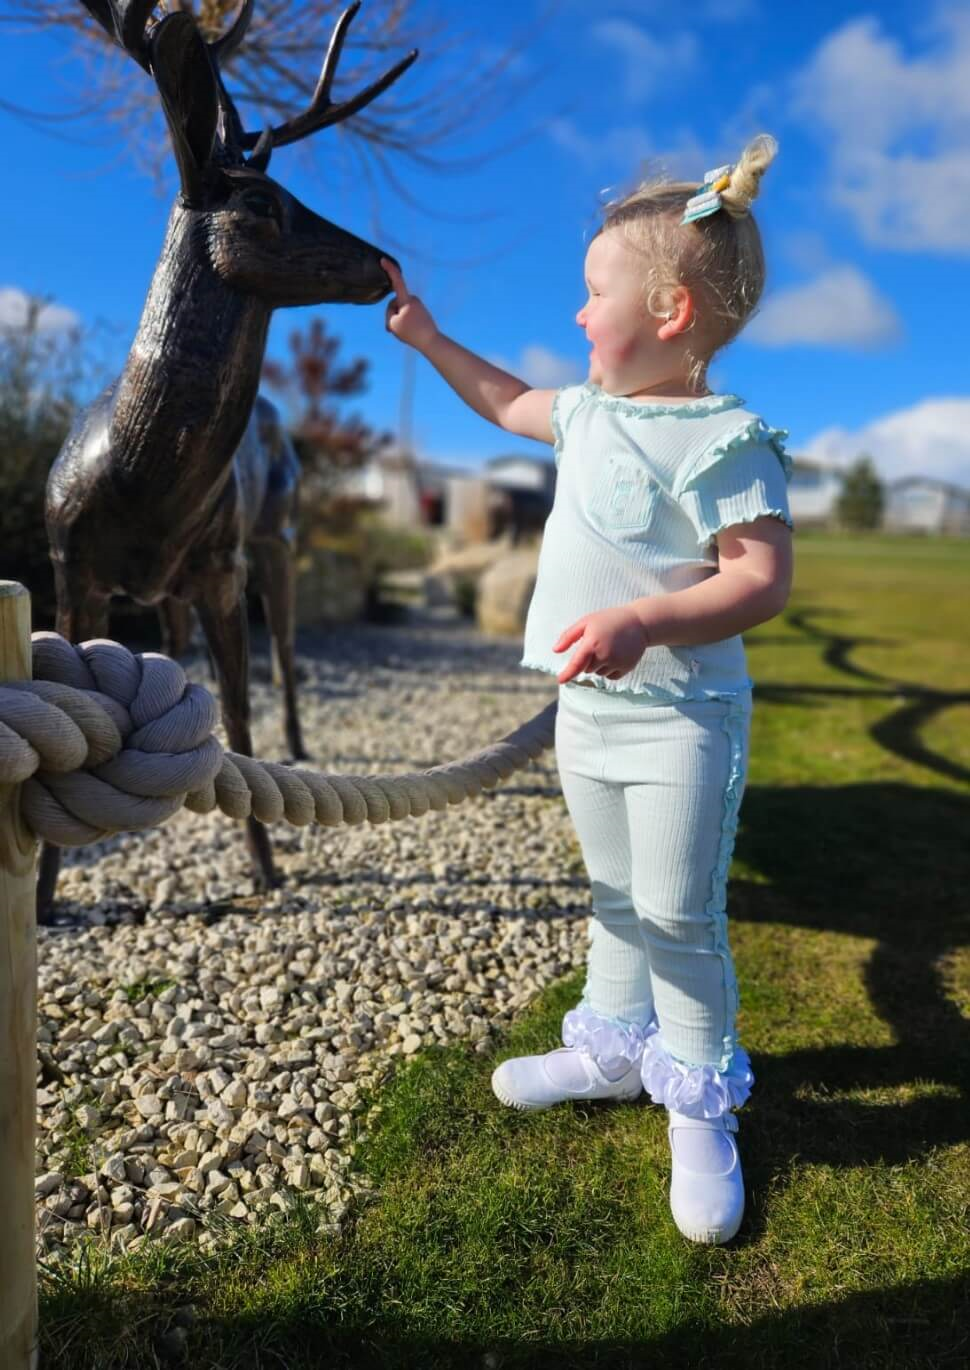 tors childrens wear brand rep Mia modelling Mint Ribbed Frill Legging Set from caramelo kids